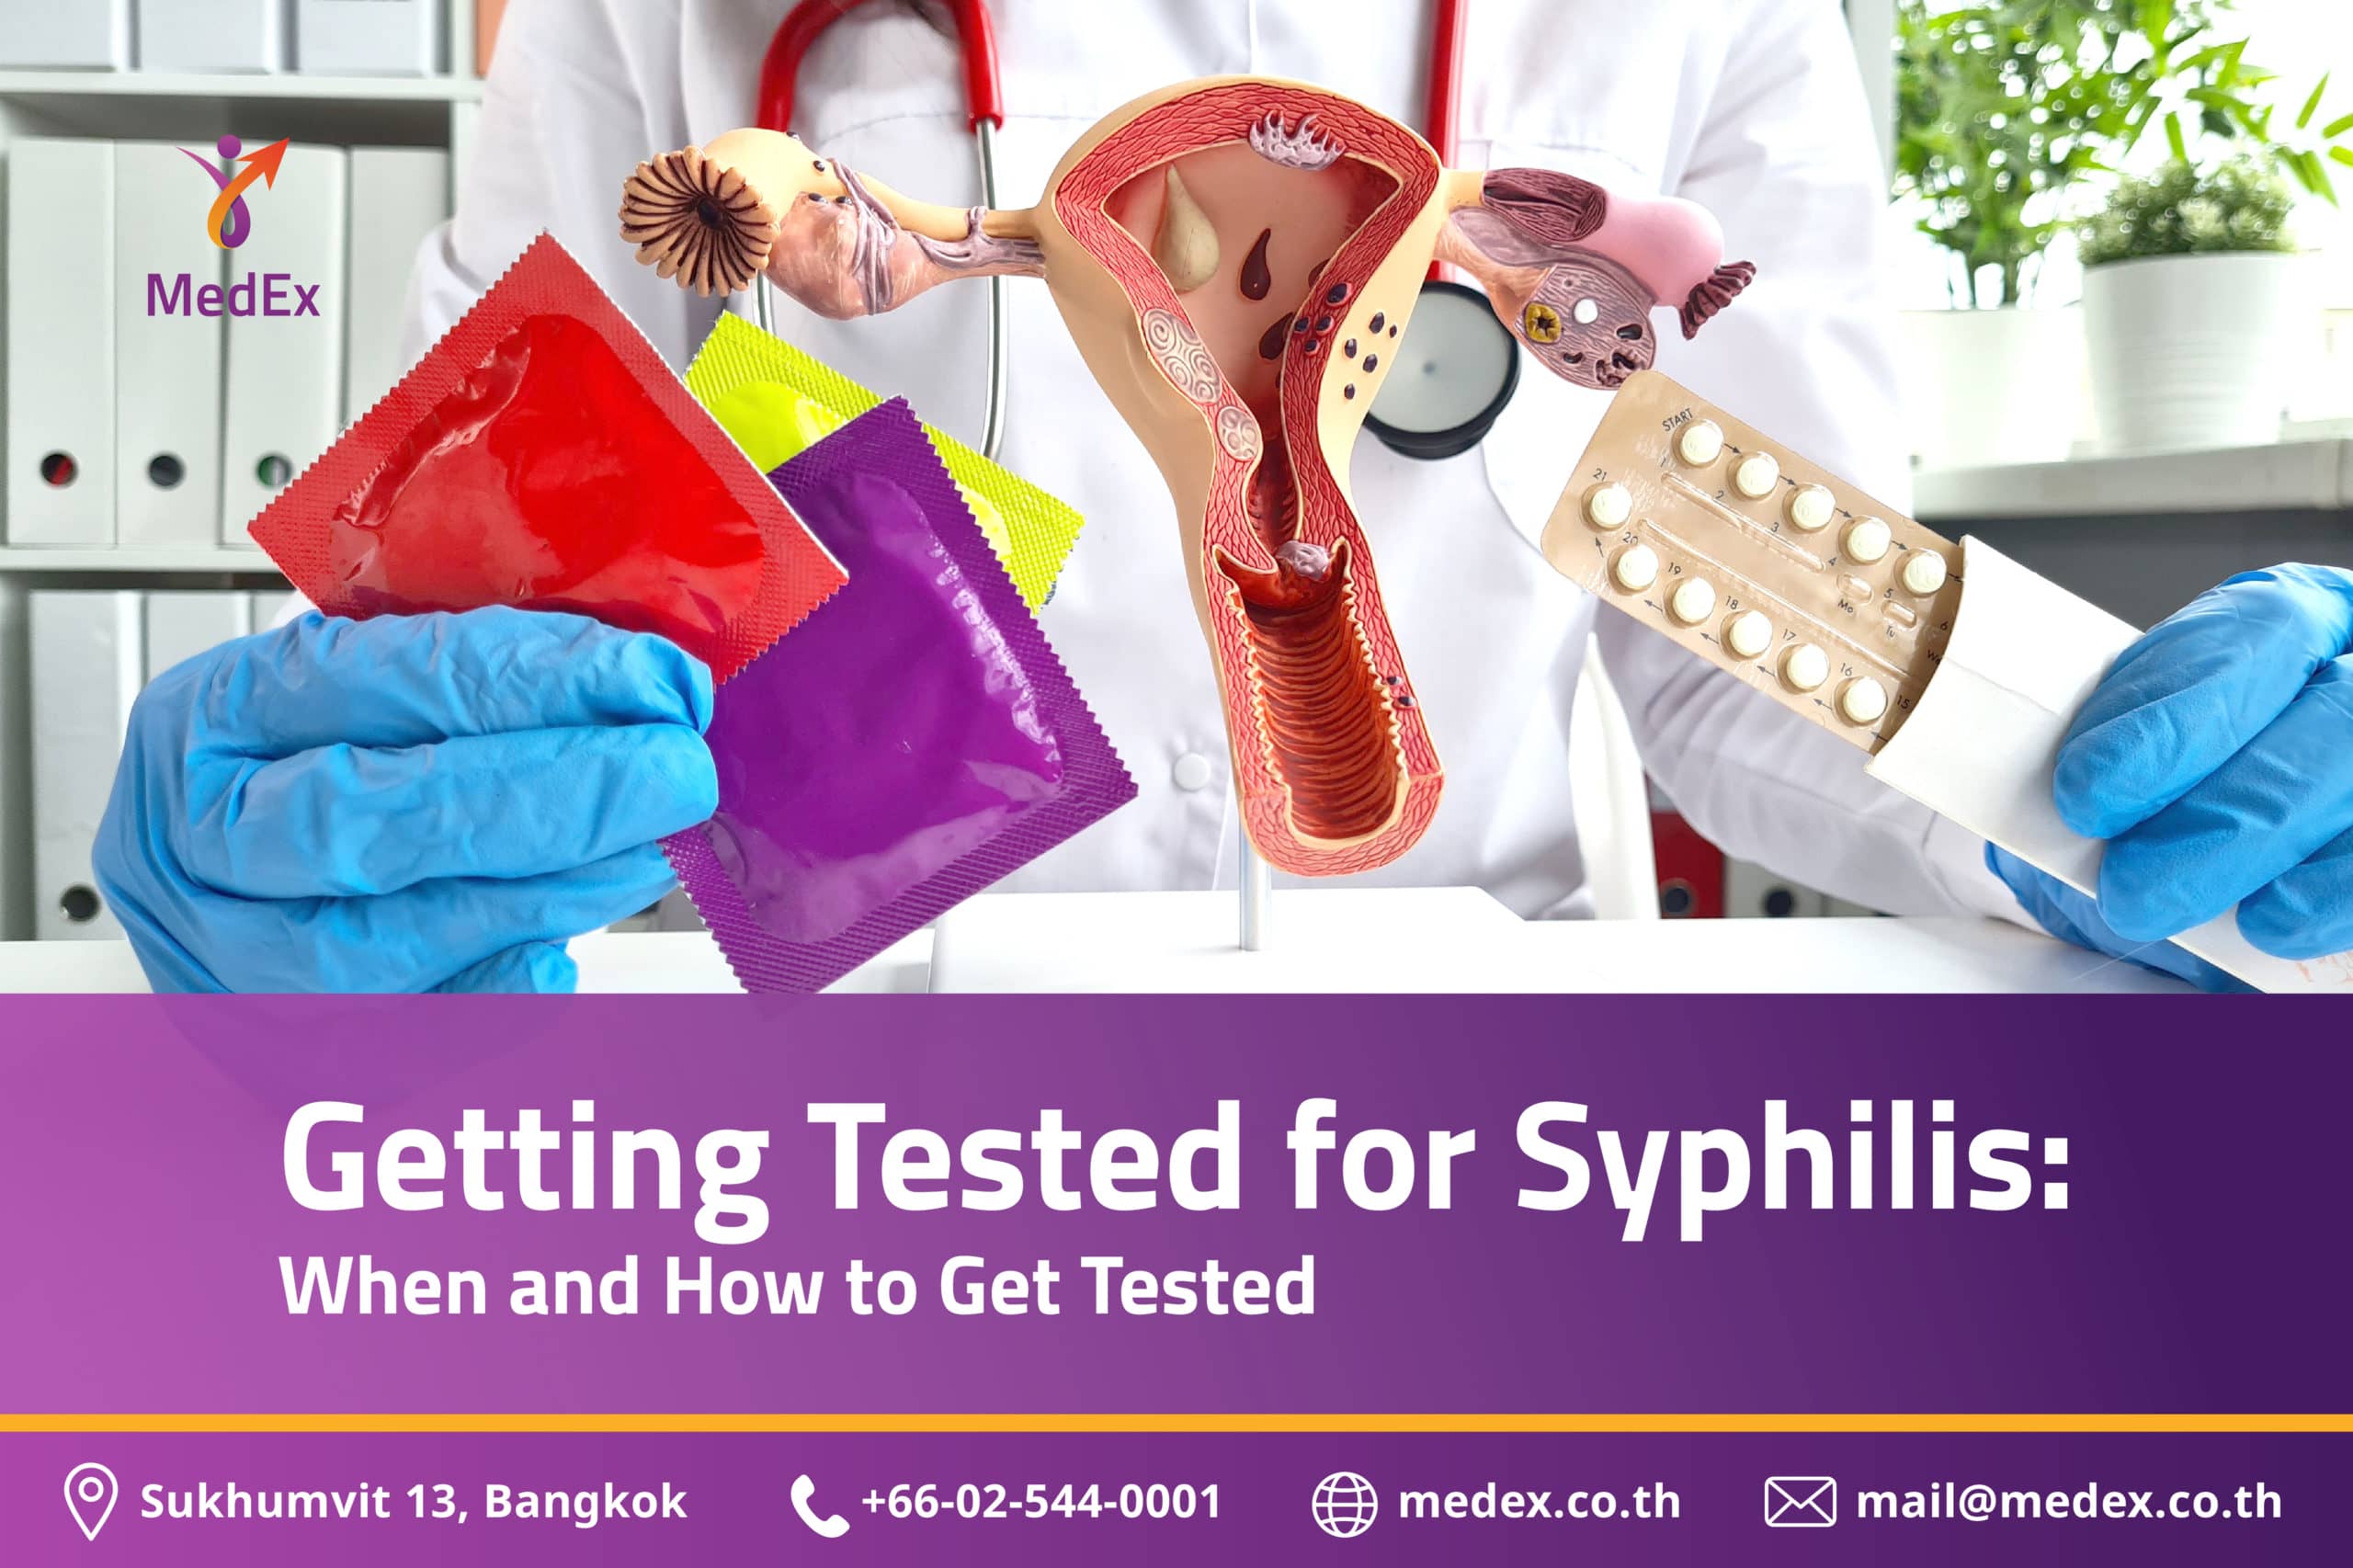 Getting Tested for Syphilis: When and How to Get Tested